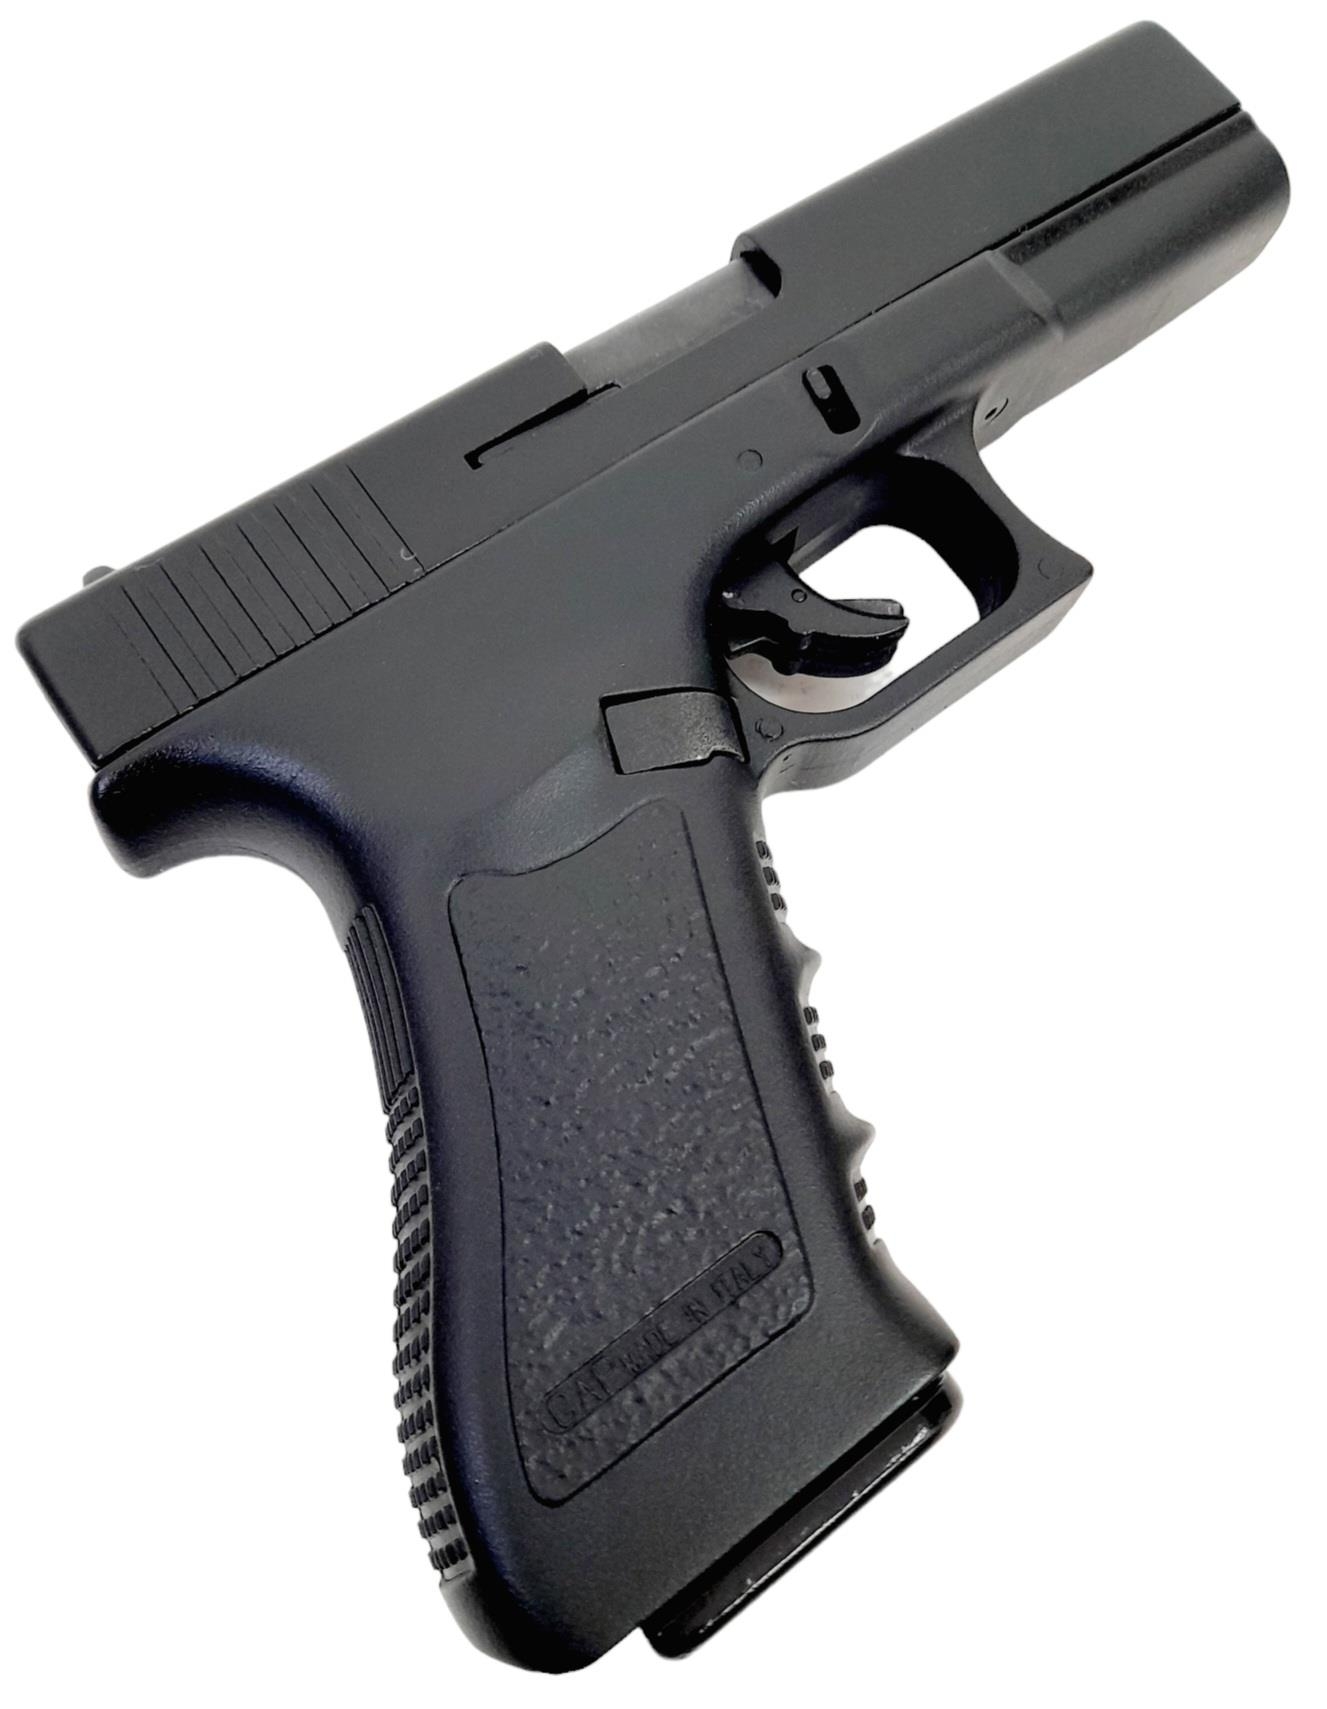 A Glock Gap 8mm Top Vented Blank Firing Pistol. Over 18 only. UK sales only. Blank guns should - Image 2 of 5